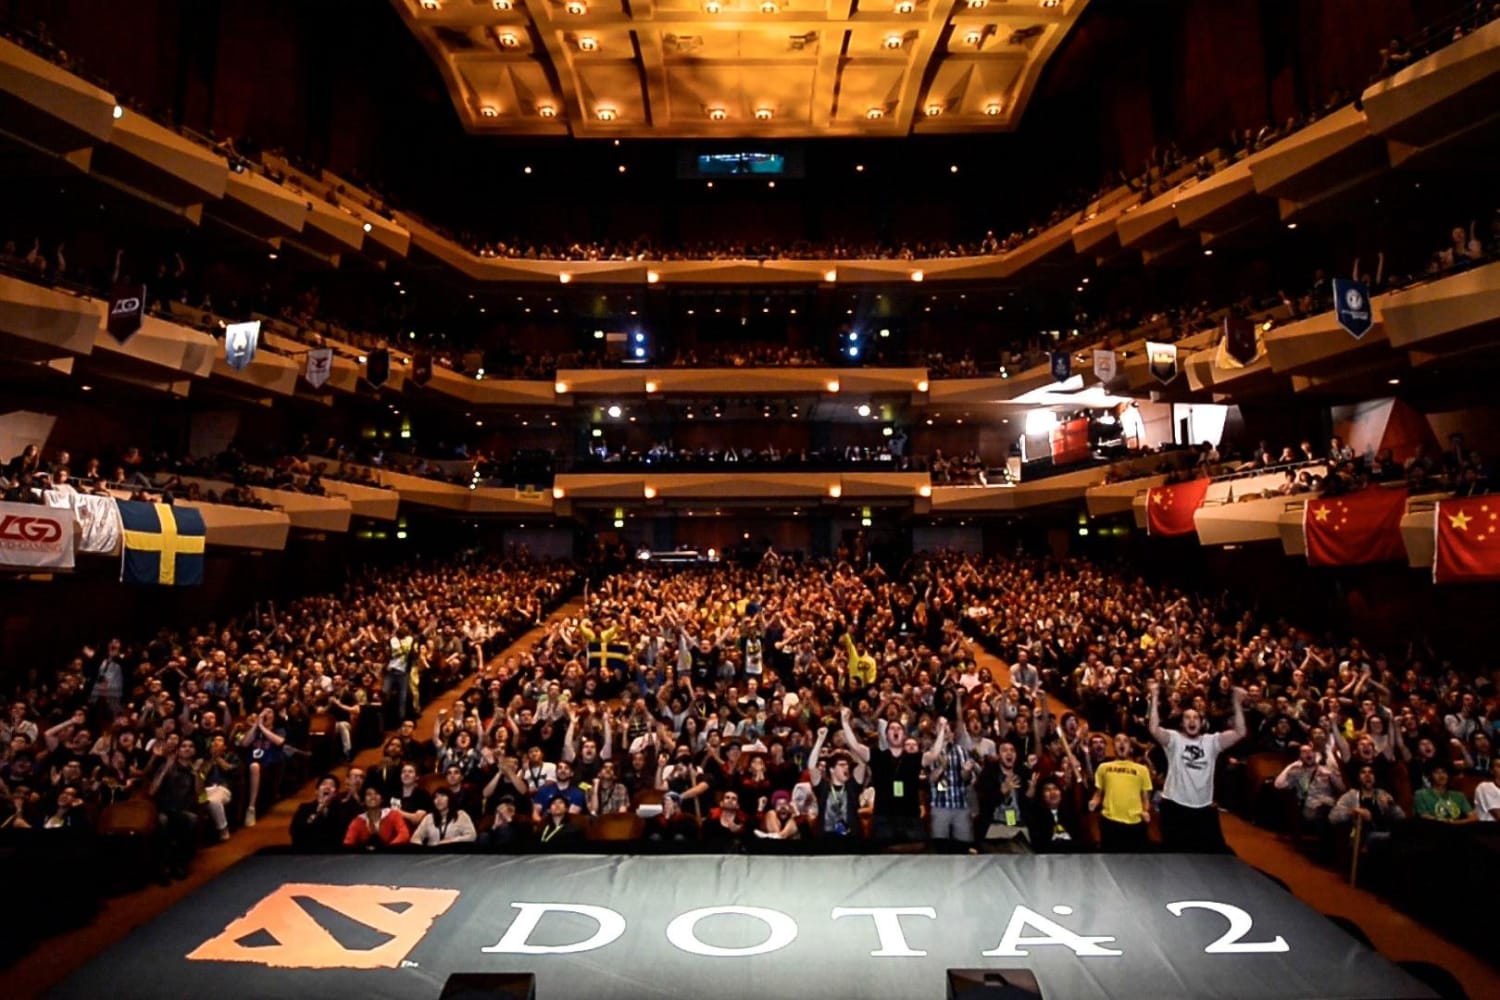 Dota 2 tournament focus of documentary 'Free to Play' from Valve – Gameverse